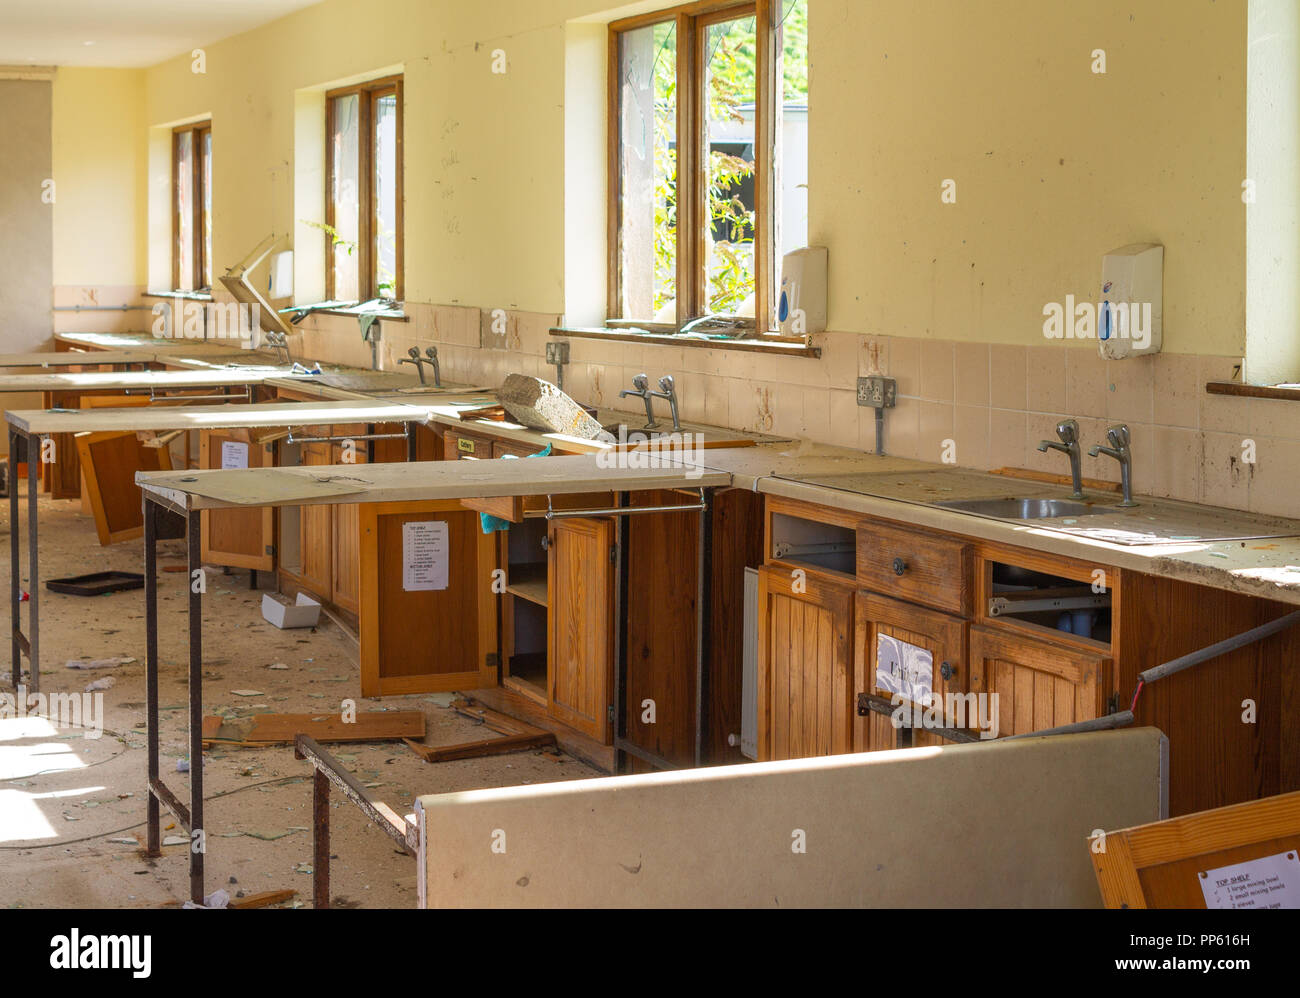 old derelict school building that's been abandoned and vandalised suffered vandalism Stock Photo